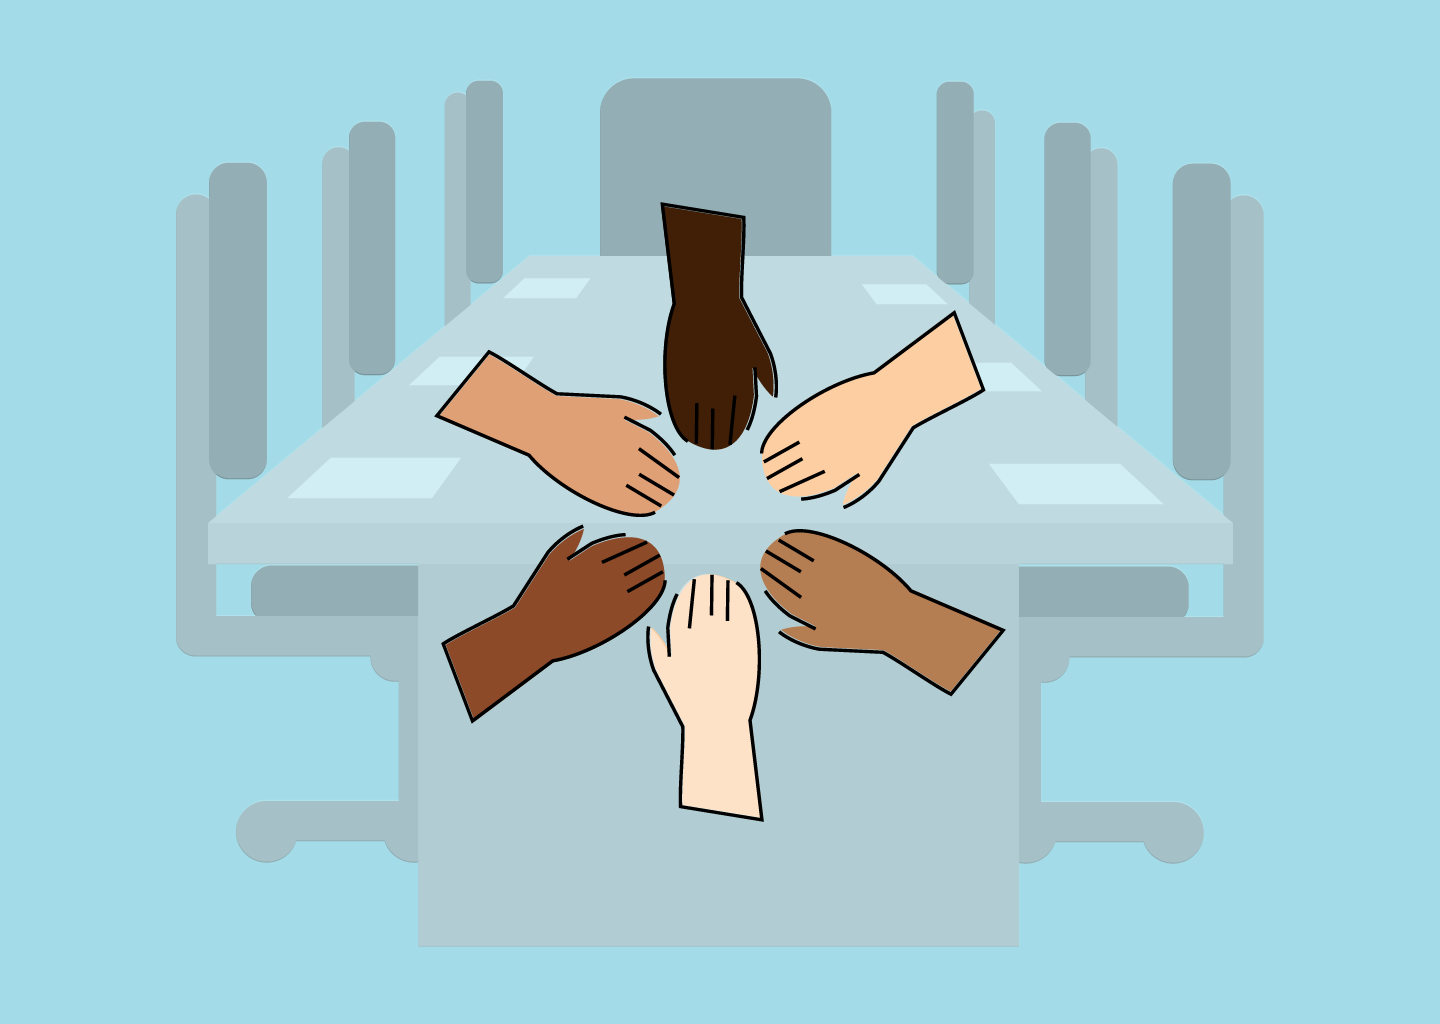 6 Steps to Increase Board Diversity at Your Nonprofit